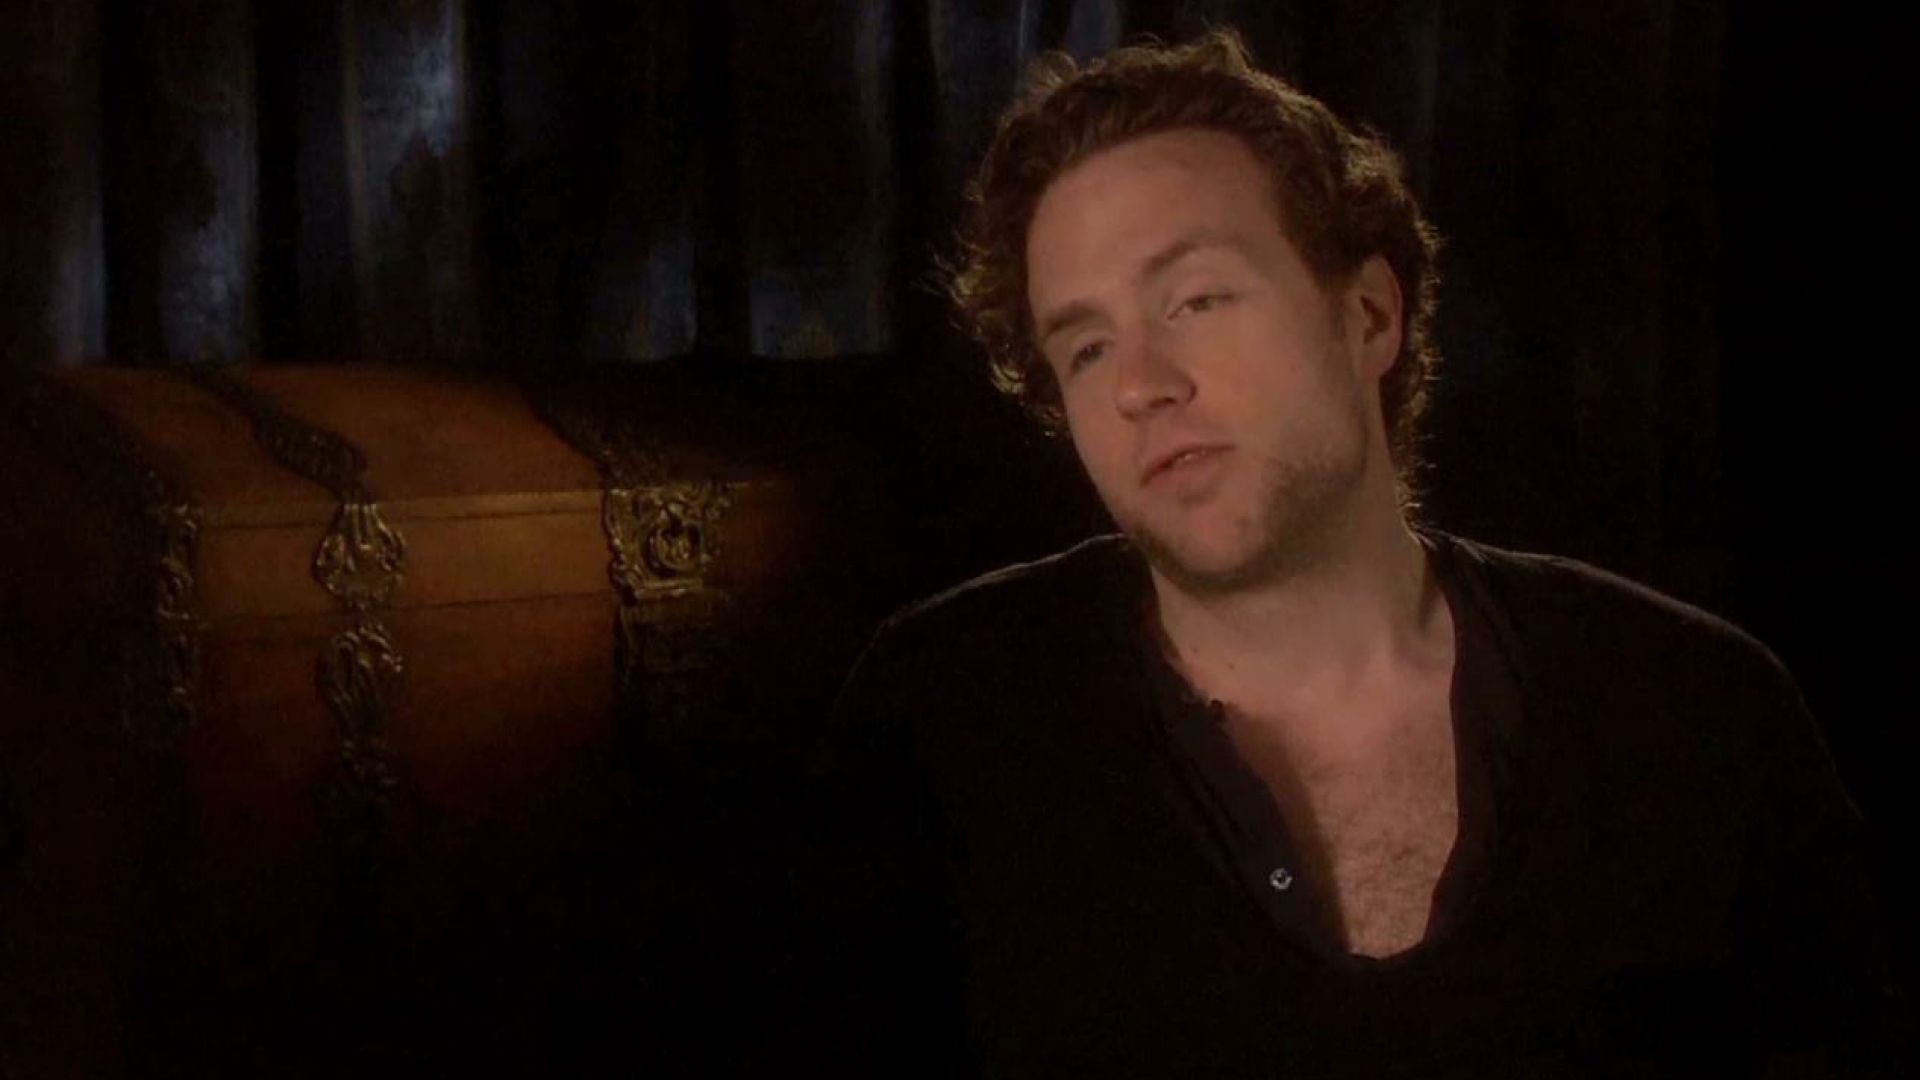 Rafe Spall talks about playing William Shakespeare in Anonymous